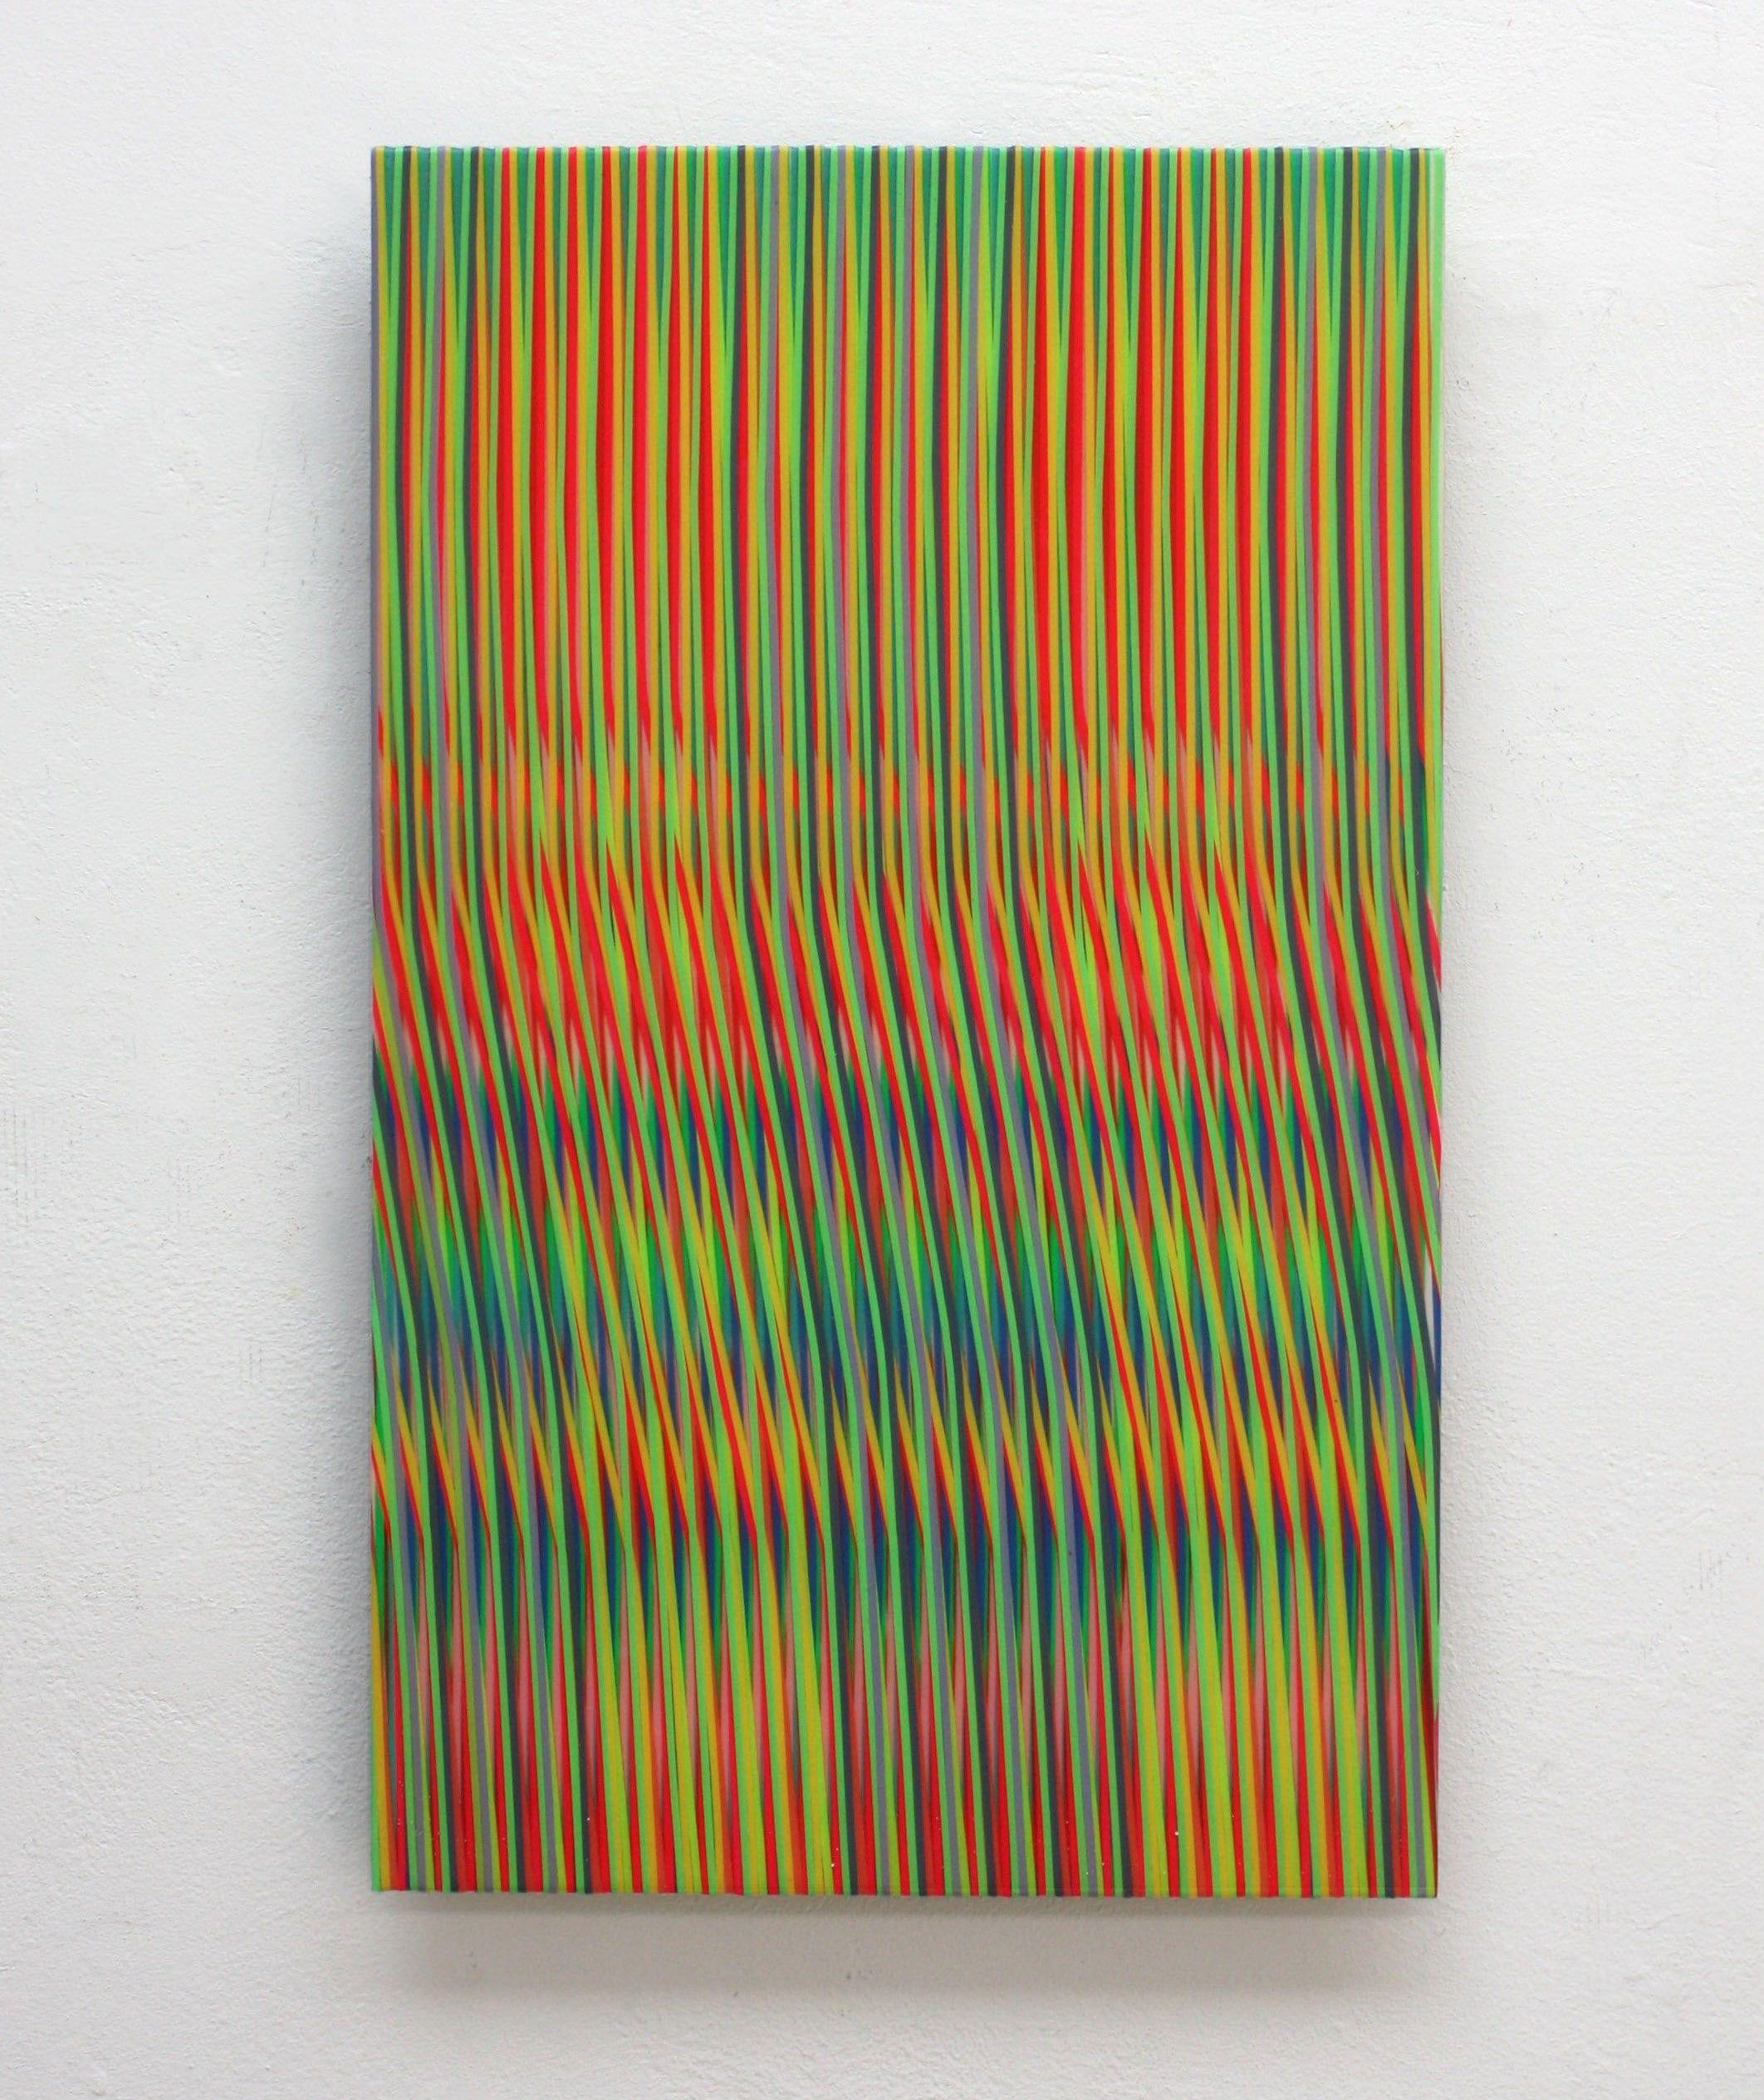 Line 1213-13 by Ahn Hyun-Ju - Abstract painting, minimalism, bright colors